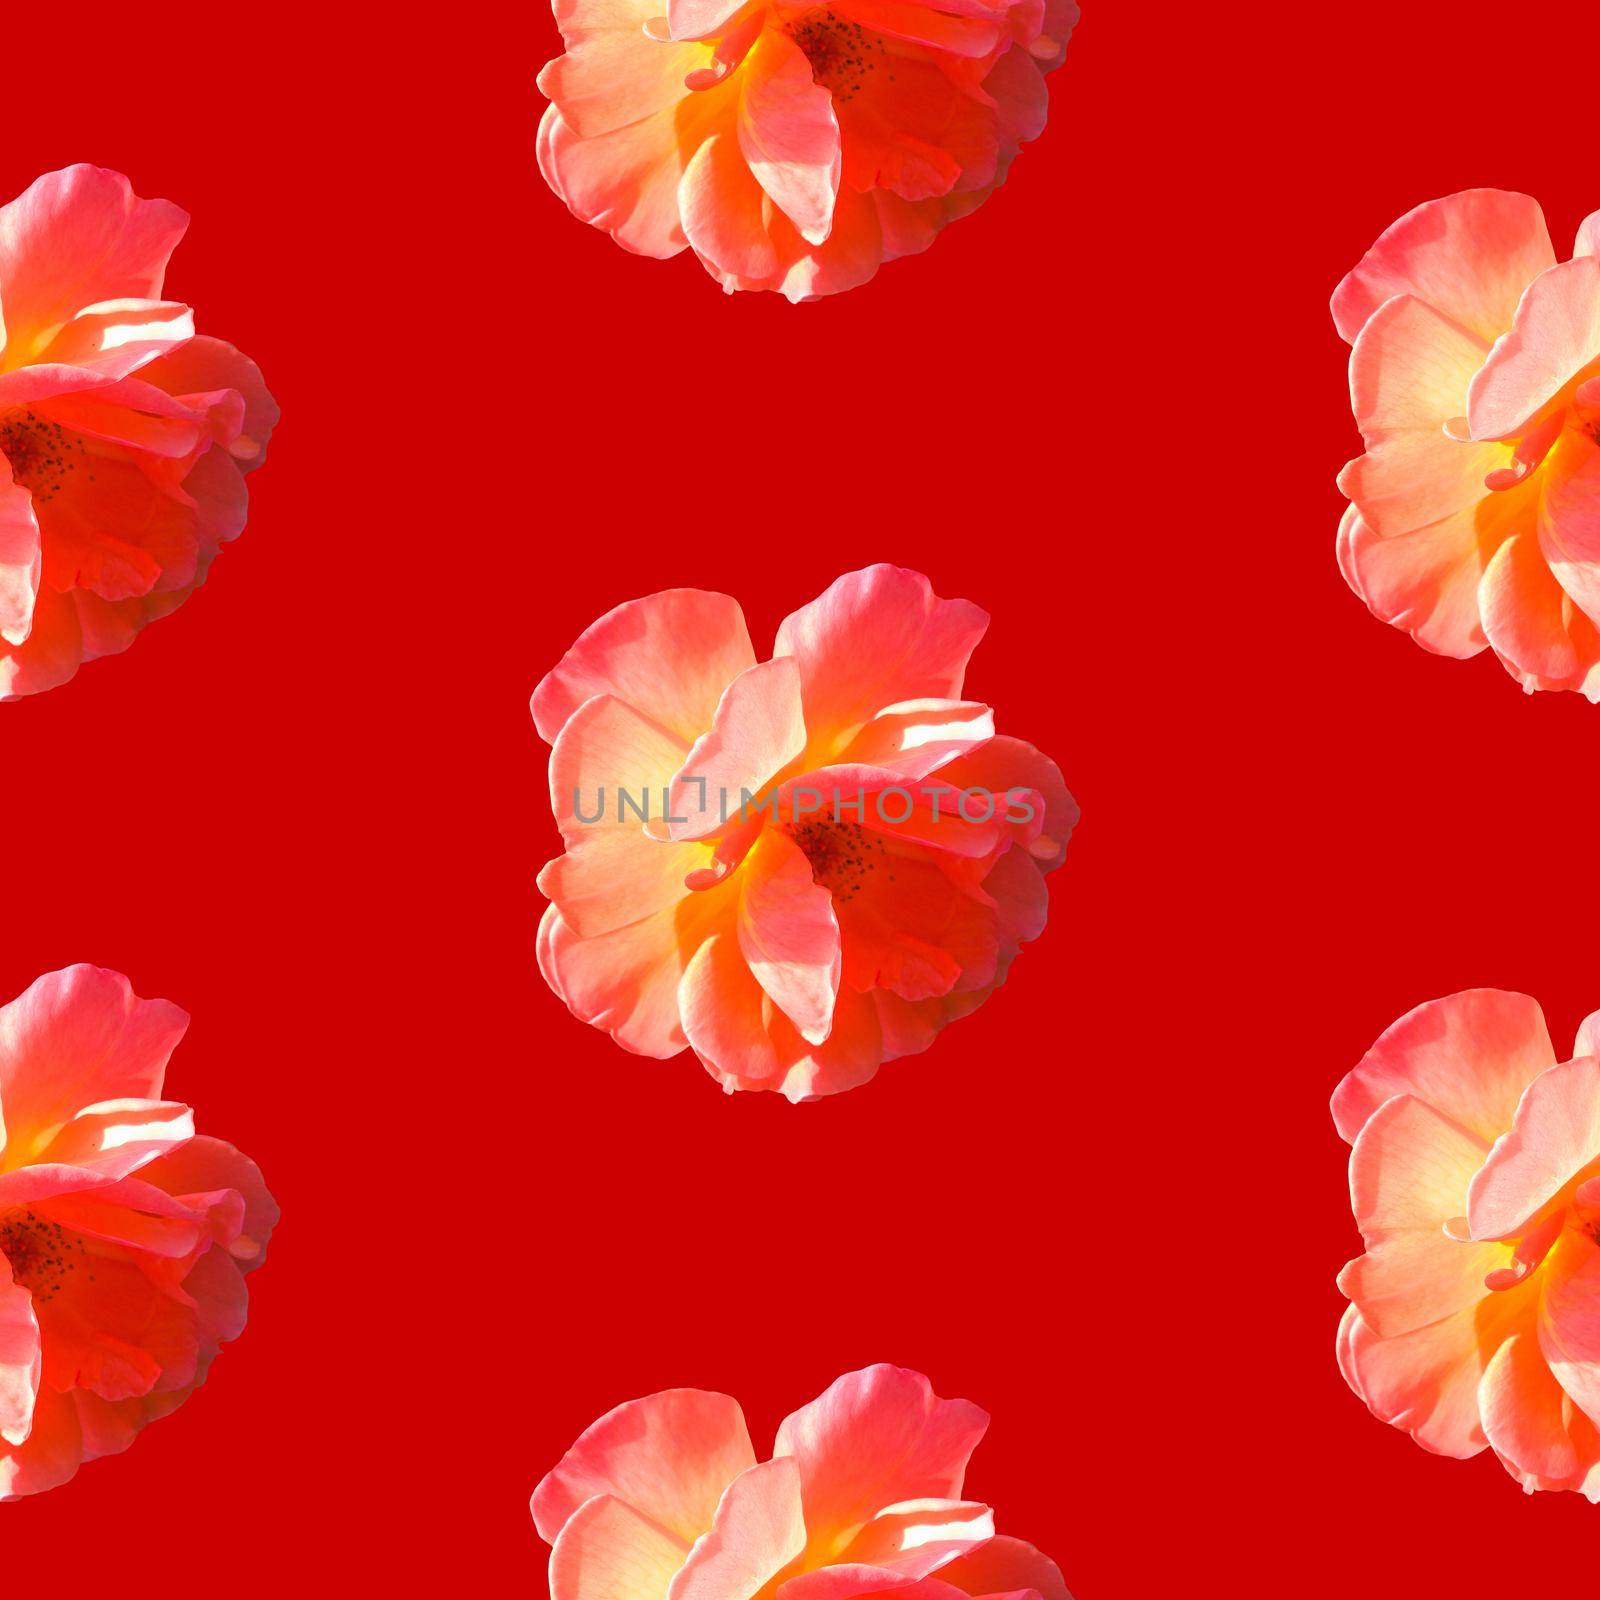 Seamless pattern with roses on a red background. Flat lay, top view. Pop art creative design for textile, fashion, wallpaper, fabric, wrapping paper.